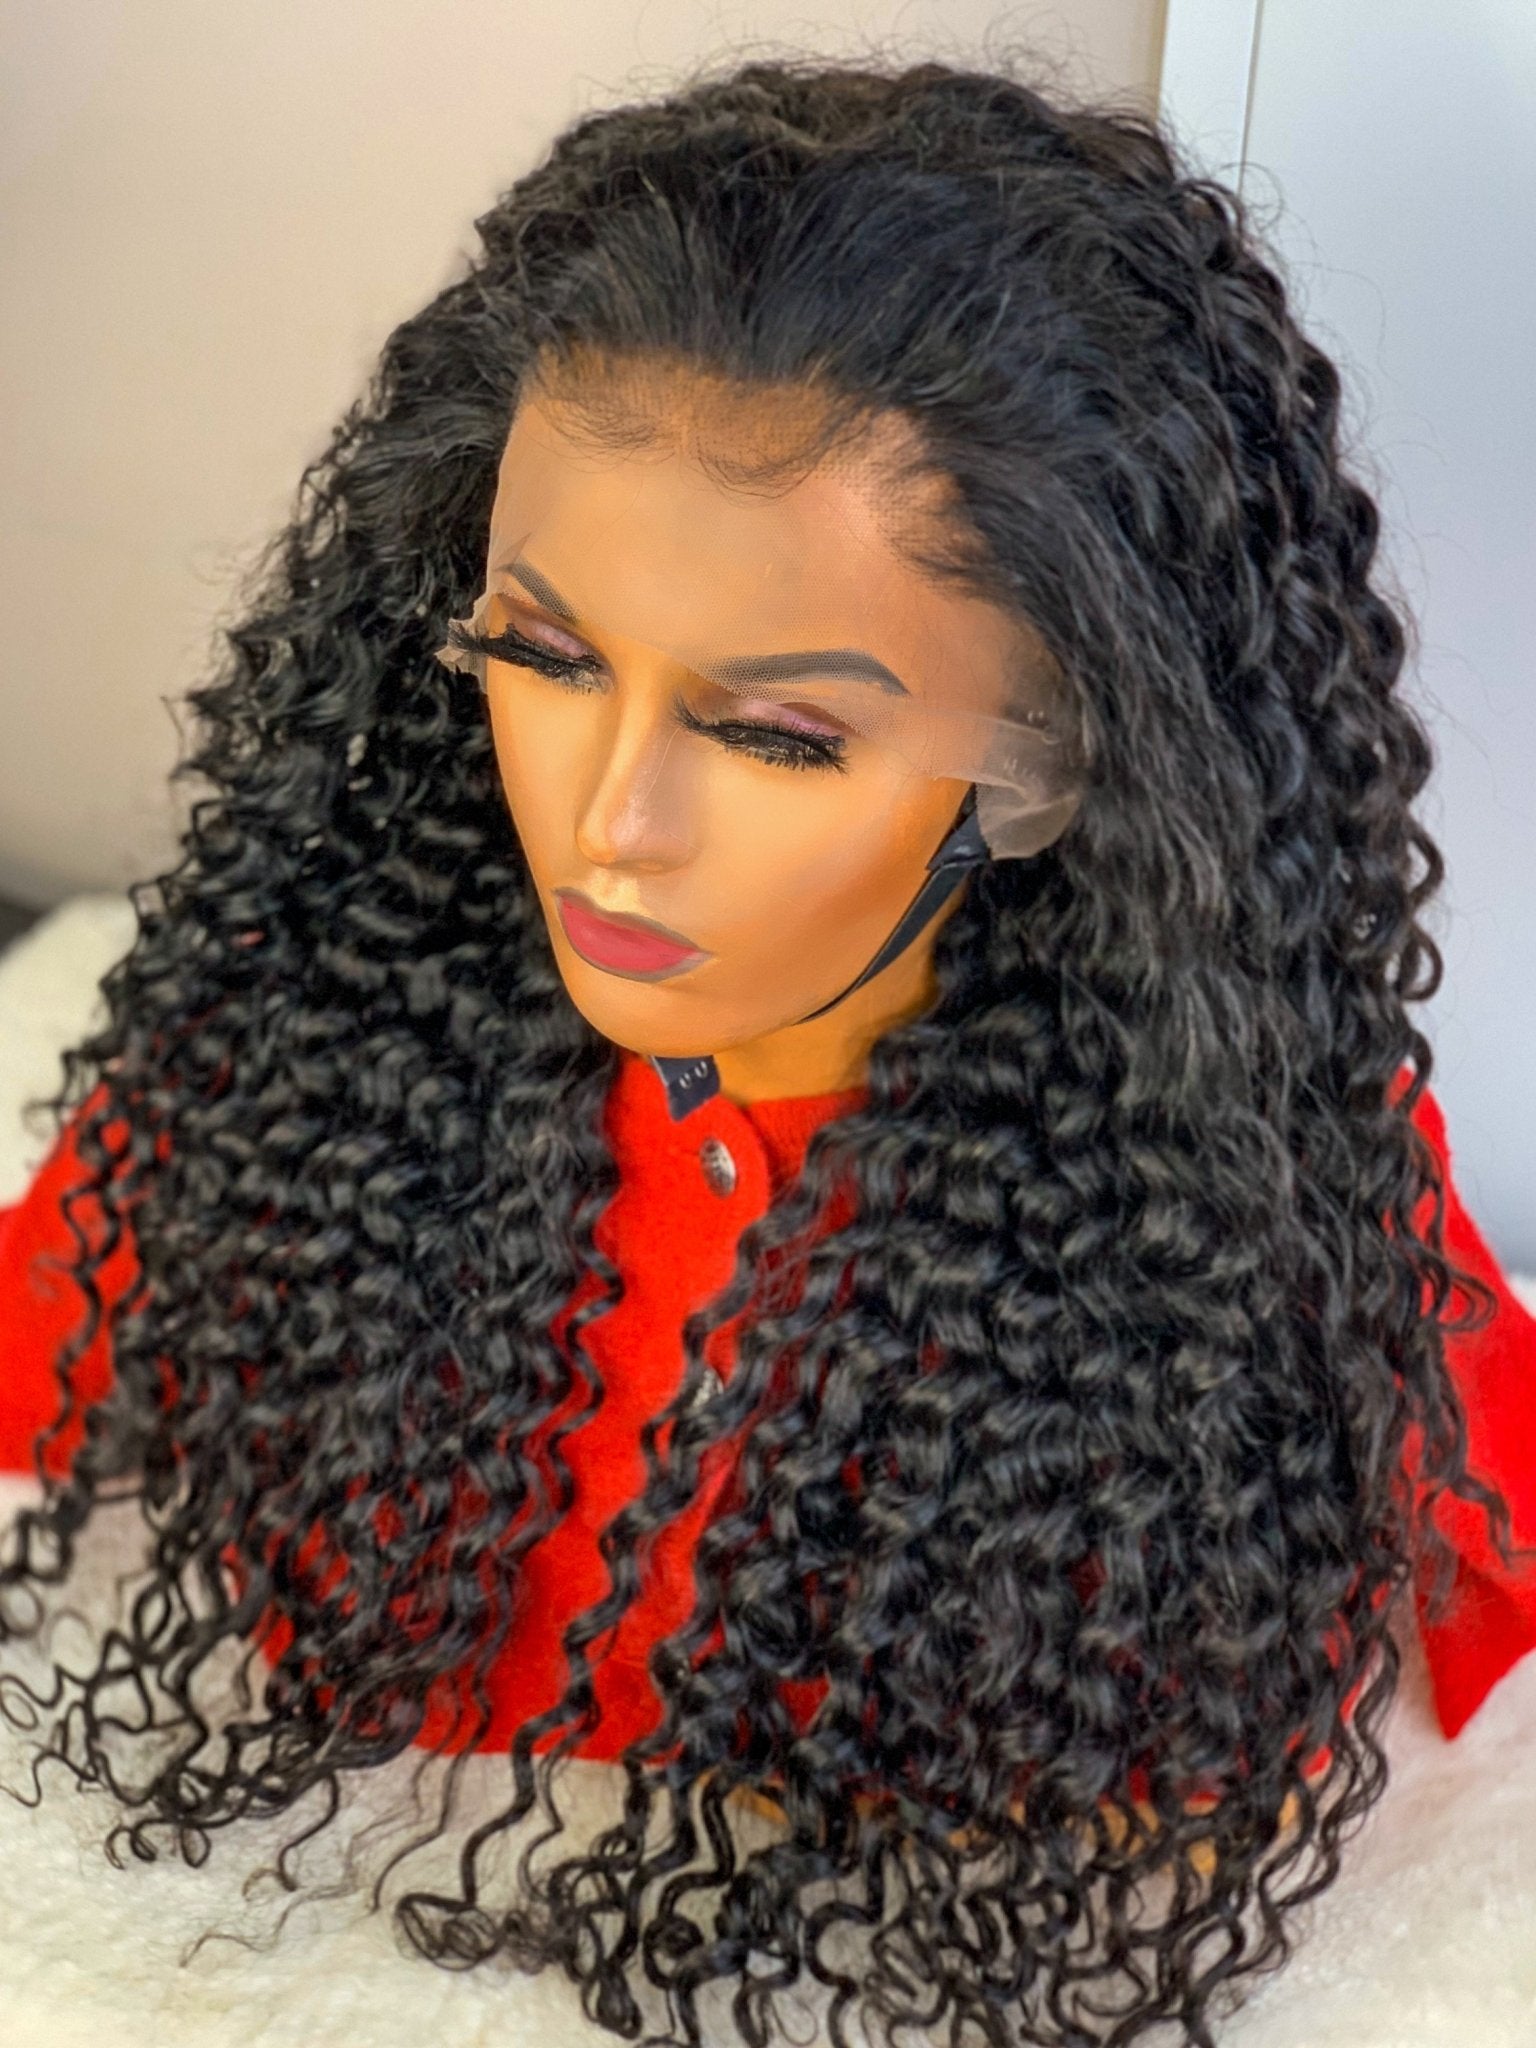 FAB DEEP WAVE LACE FRONTAL LUXURY WIG - Fab Beauty Supplies